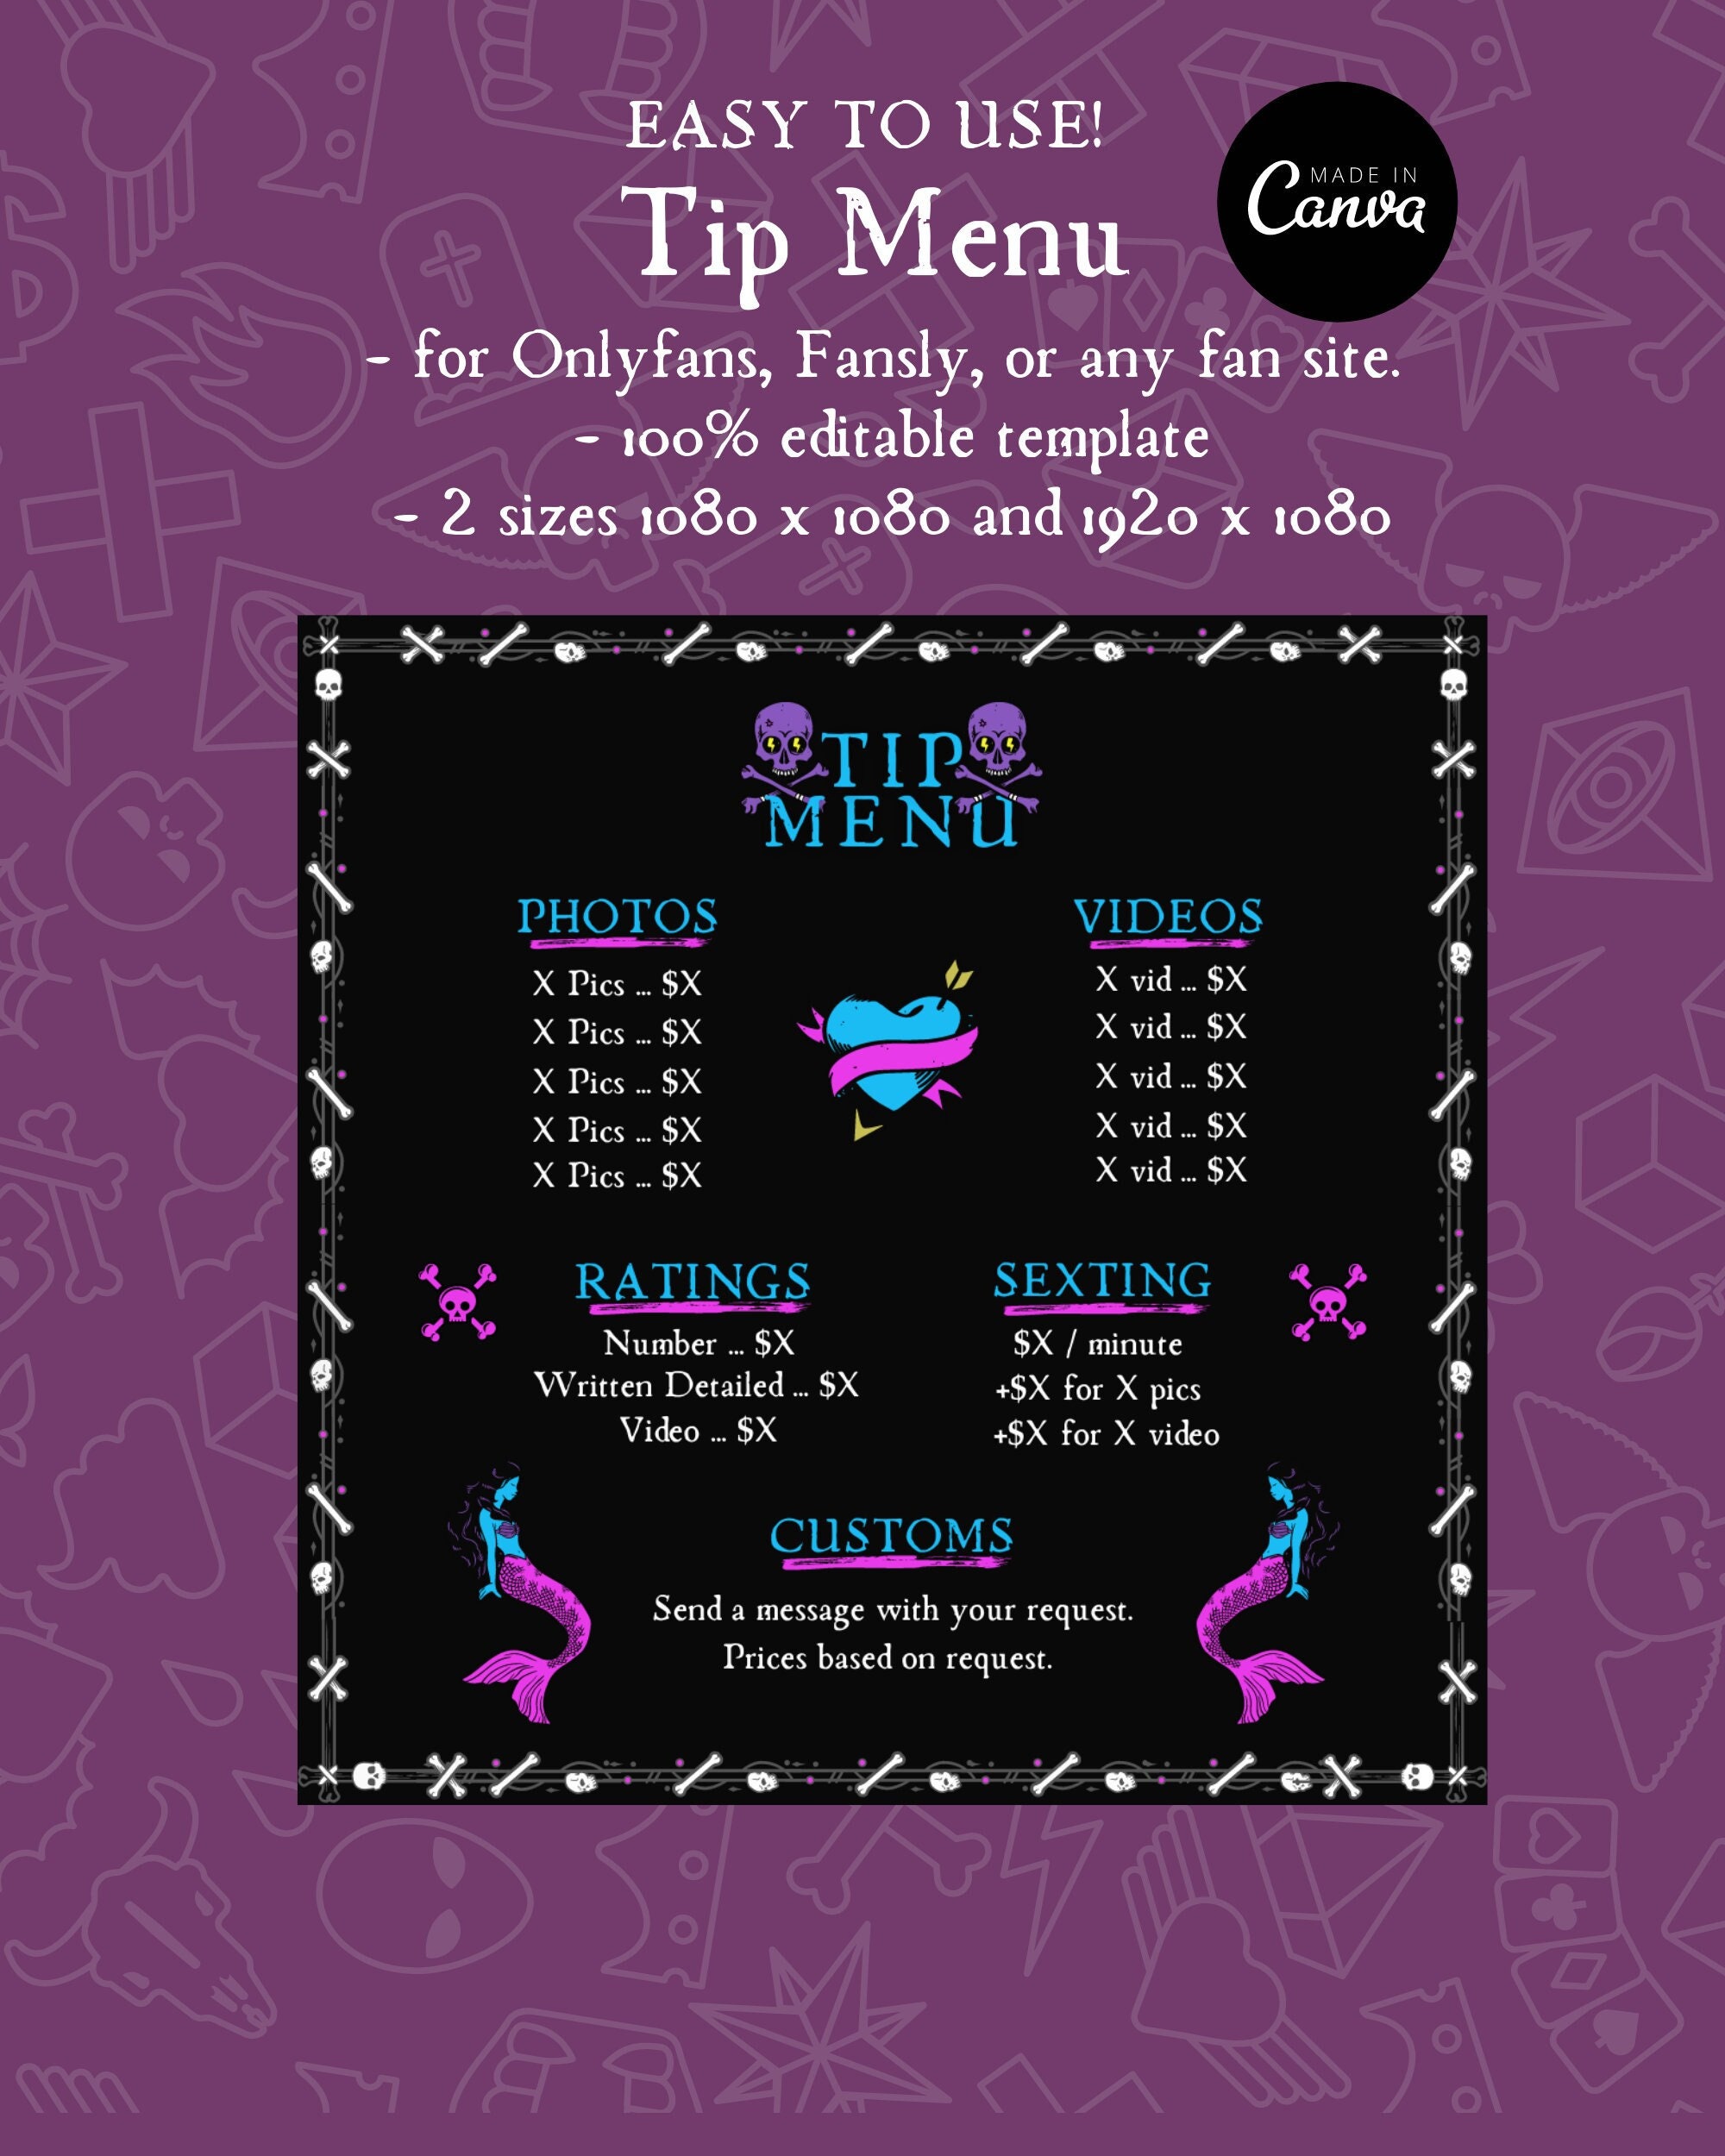 editable-tip-menu-template-for-onlyfans-fansly-or-any-site-etsy-singapore